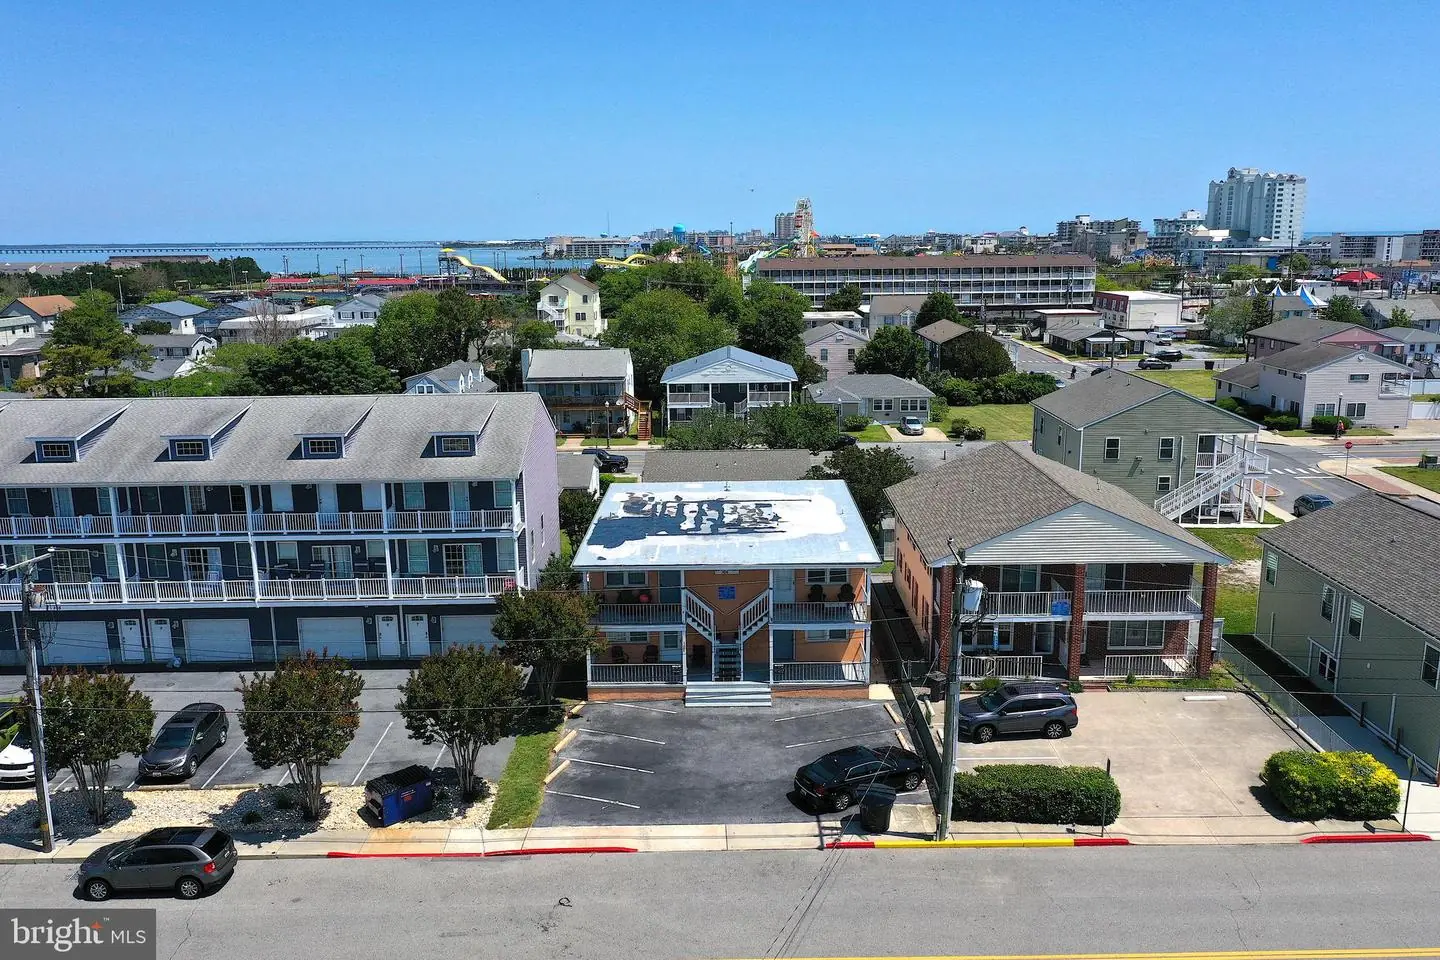 MDWO2014486-802399887040-2023-11-29-12-09-02 304 26th St | Ocean City, MD Real Estate For Sale | MLS# Mdwo2014486  - 1st Choice Properties